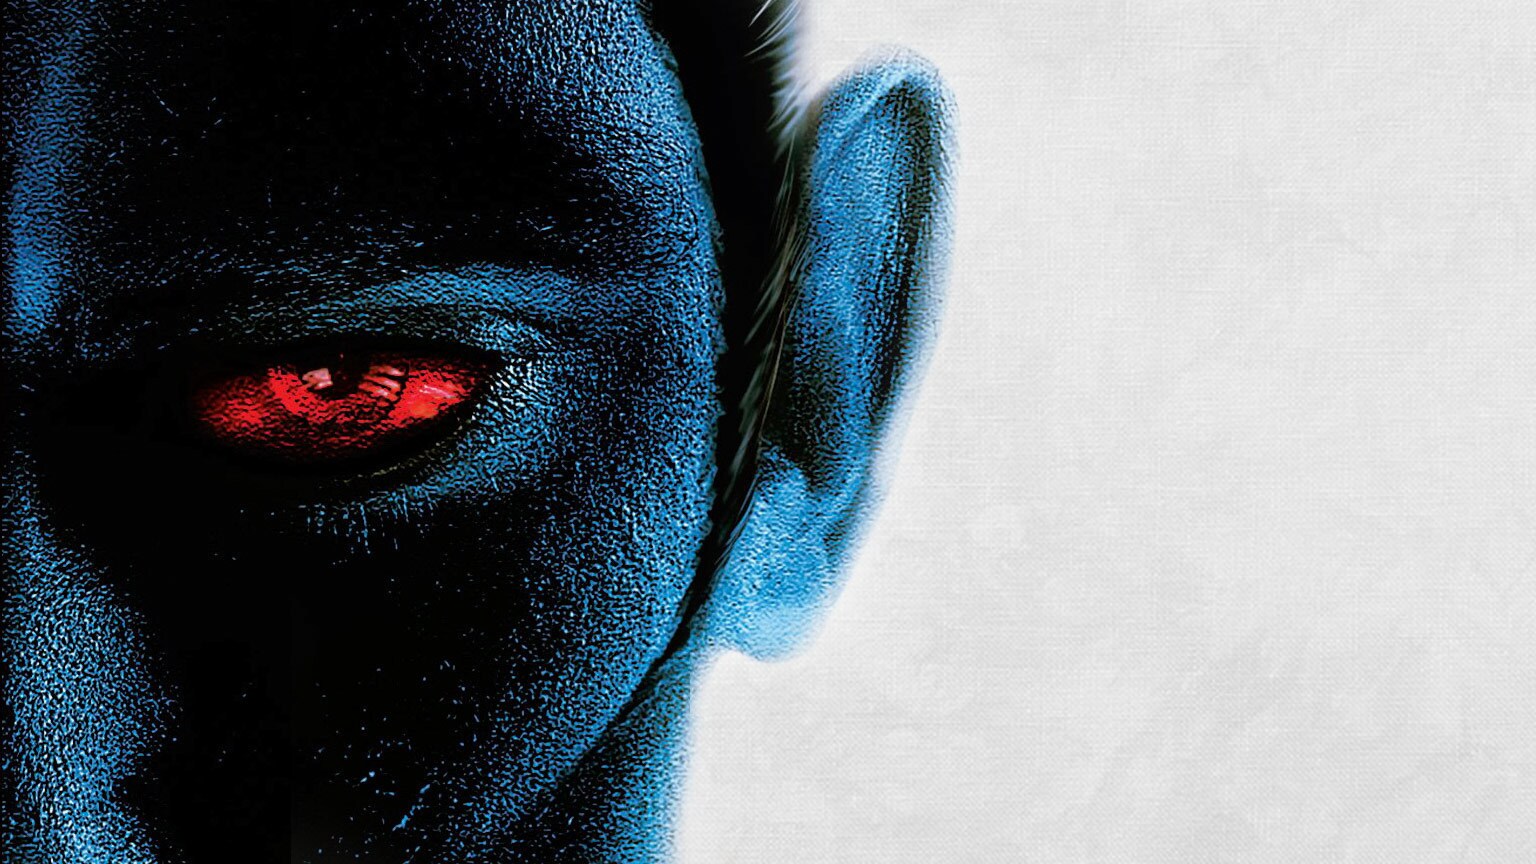 Timothy Zahn on His Novel Thrawn, How to Pronounce the Grand Admiral's Full Name, and More